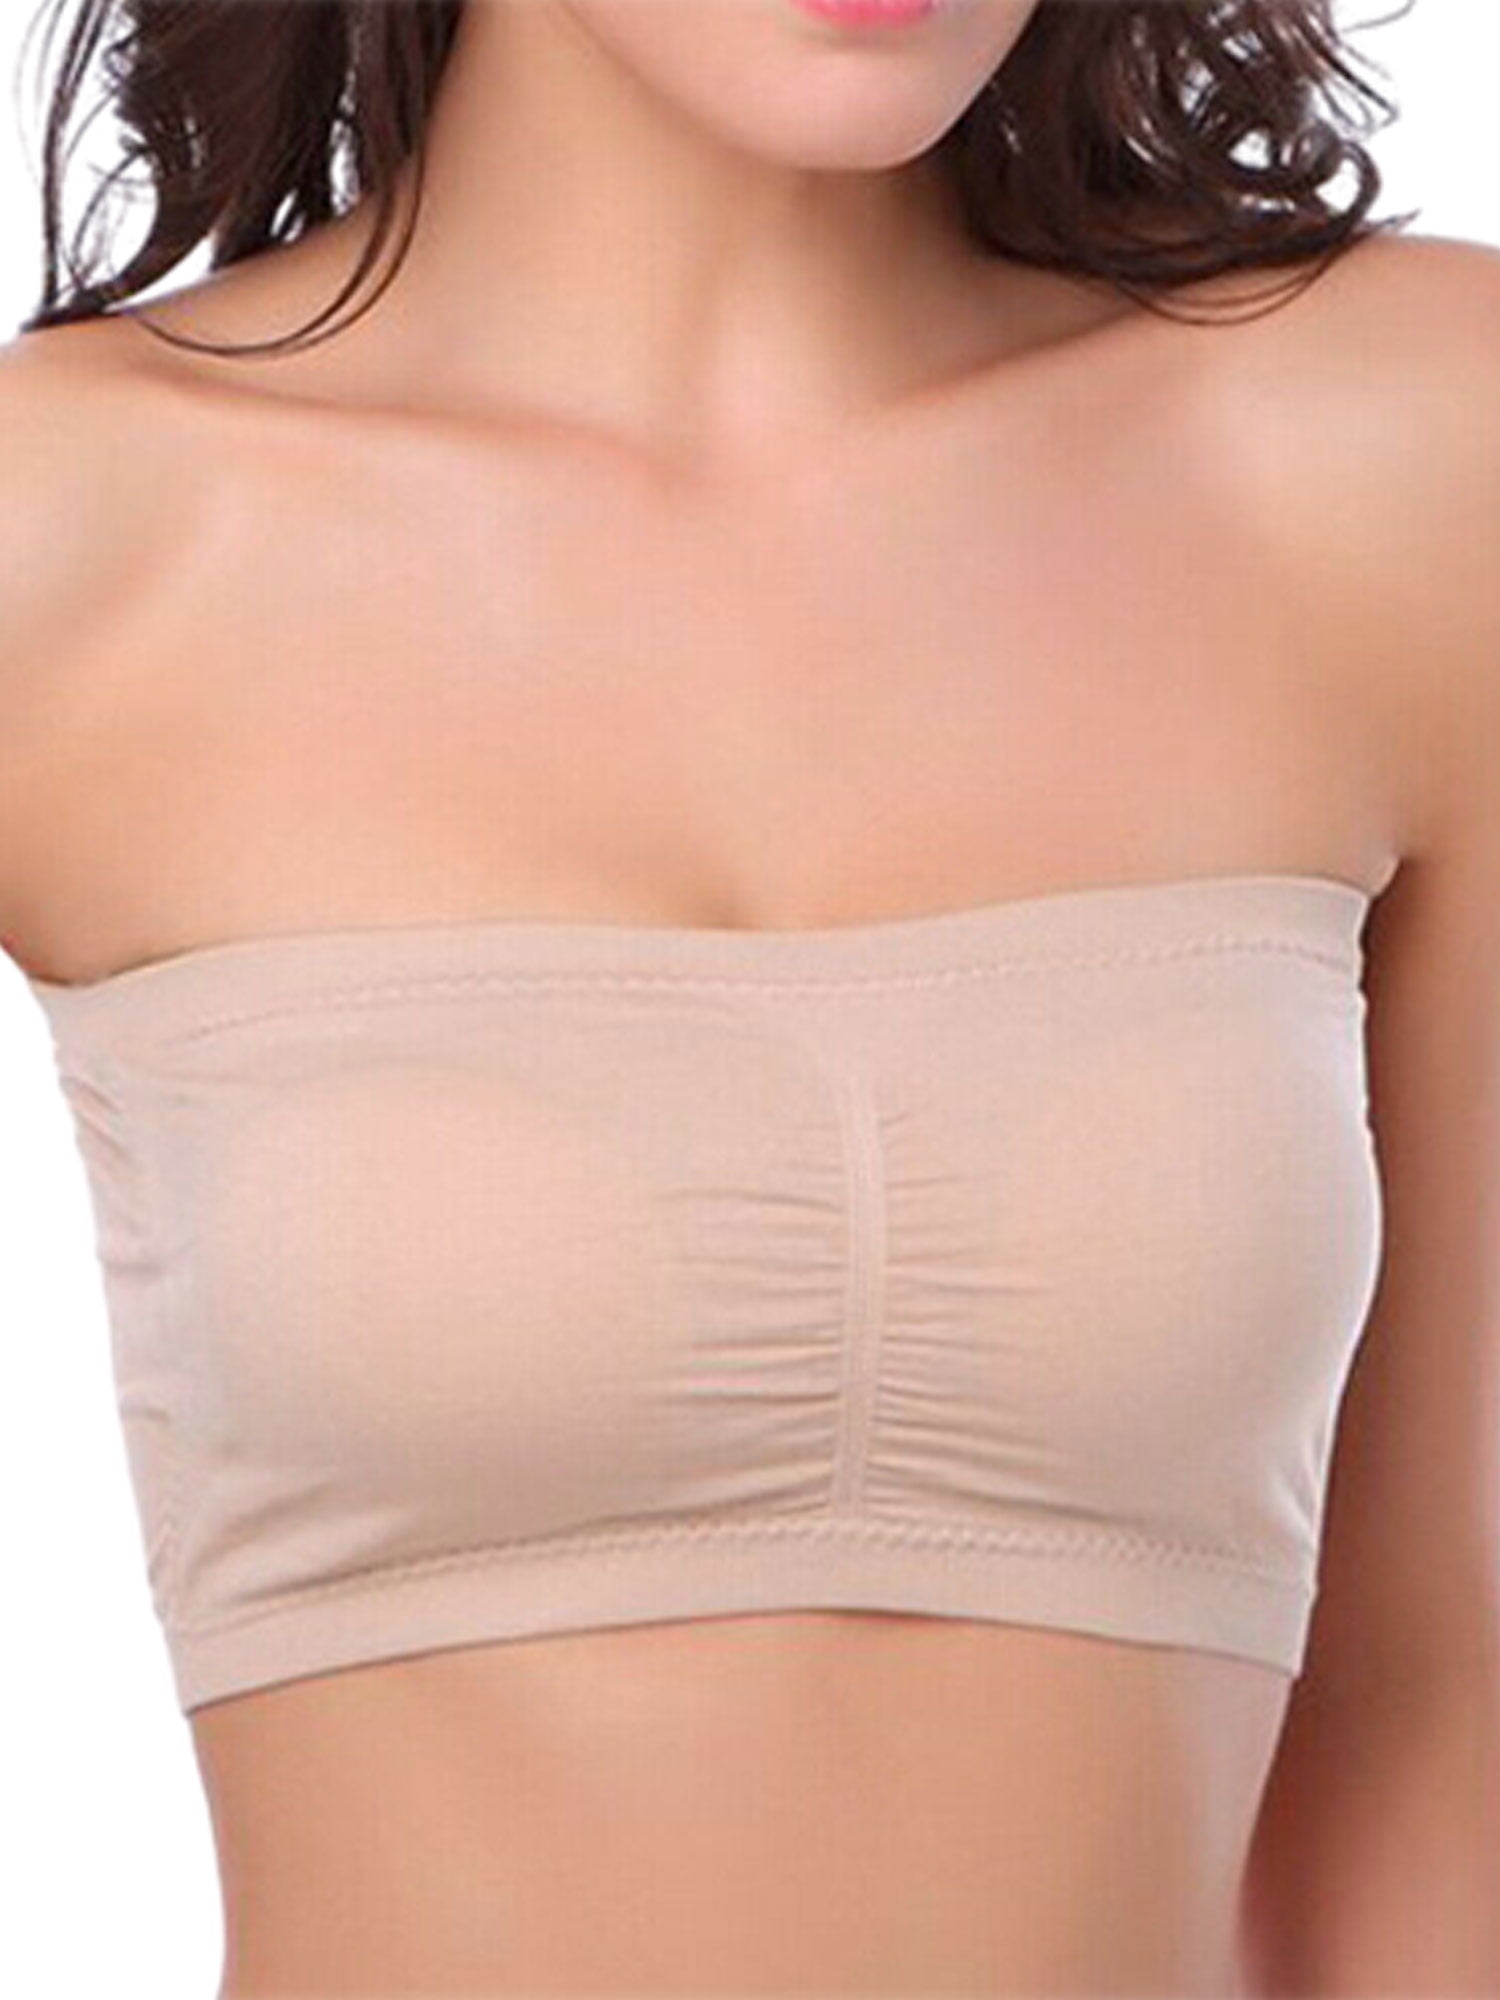 S, Black #1 Women Breast Wrap Solid Strapless Elastic Boob Bandeau Tube Tops Bra Cami Crop Tops for Teen Girls